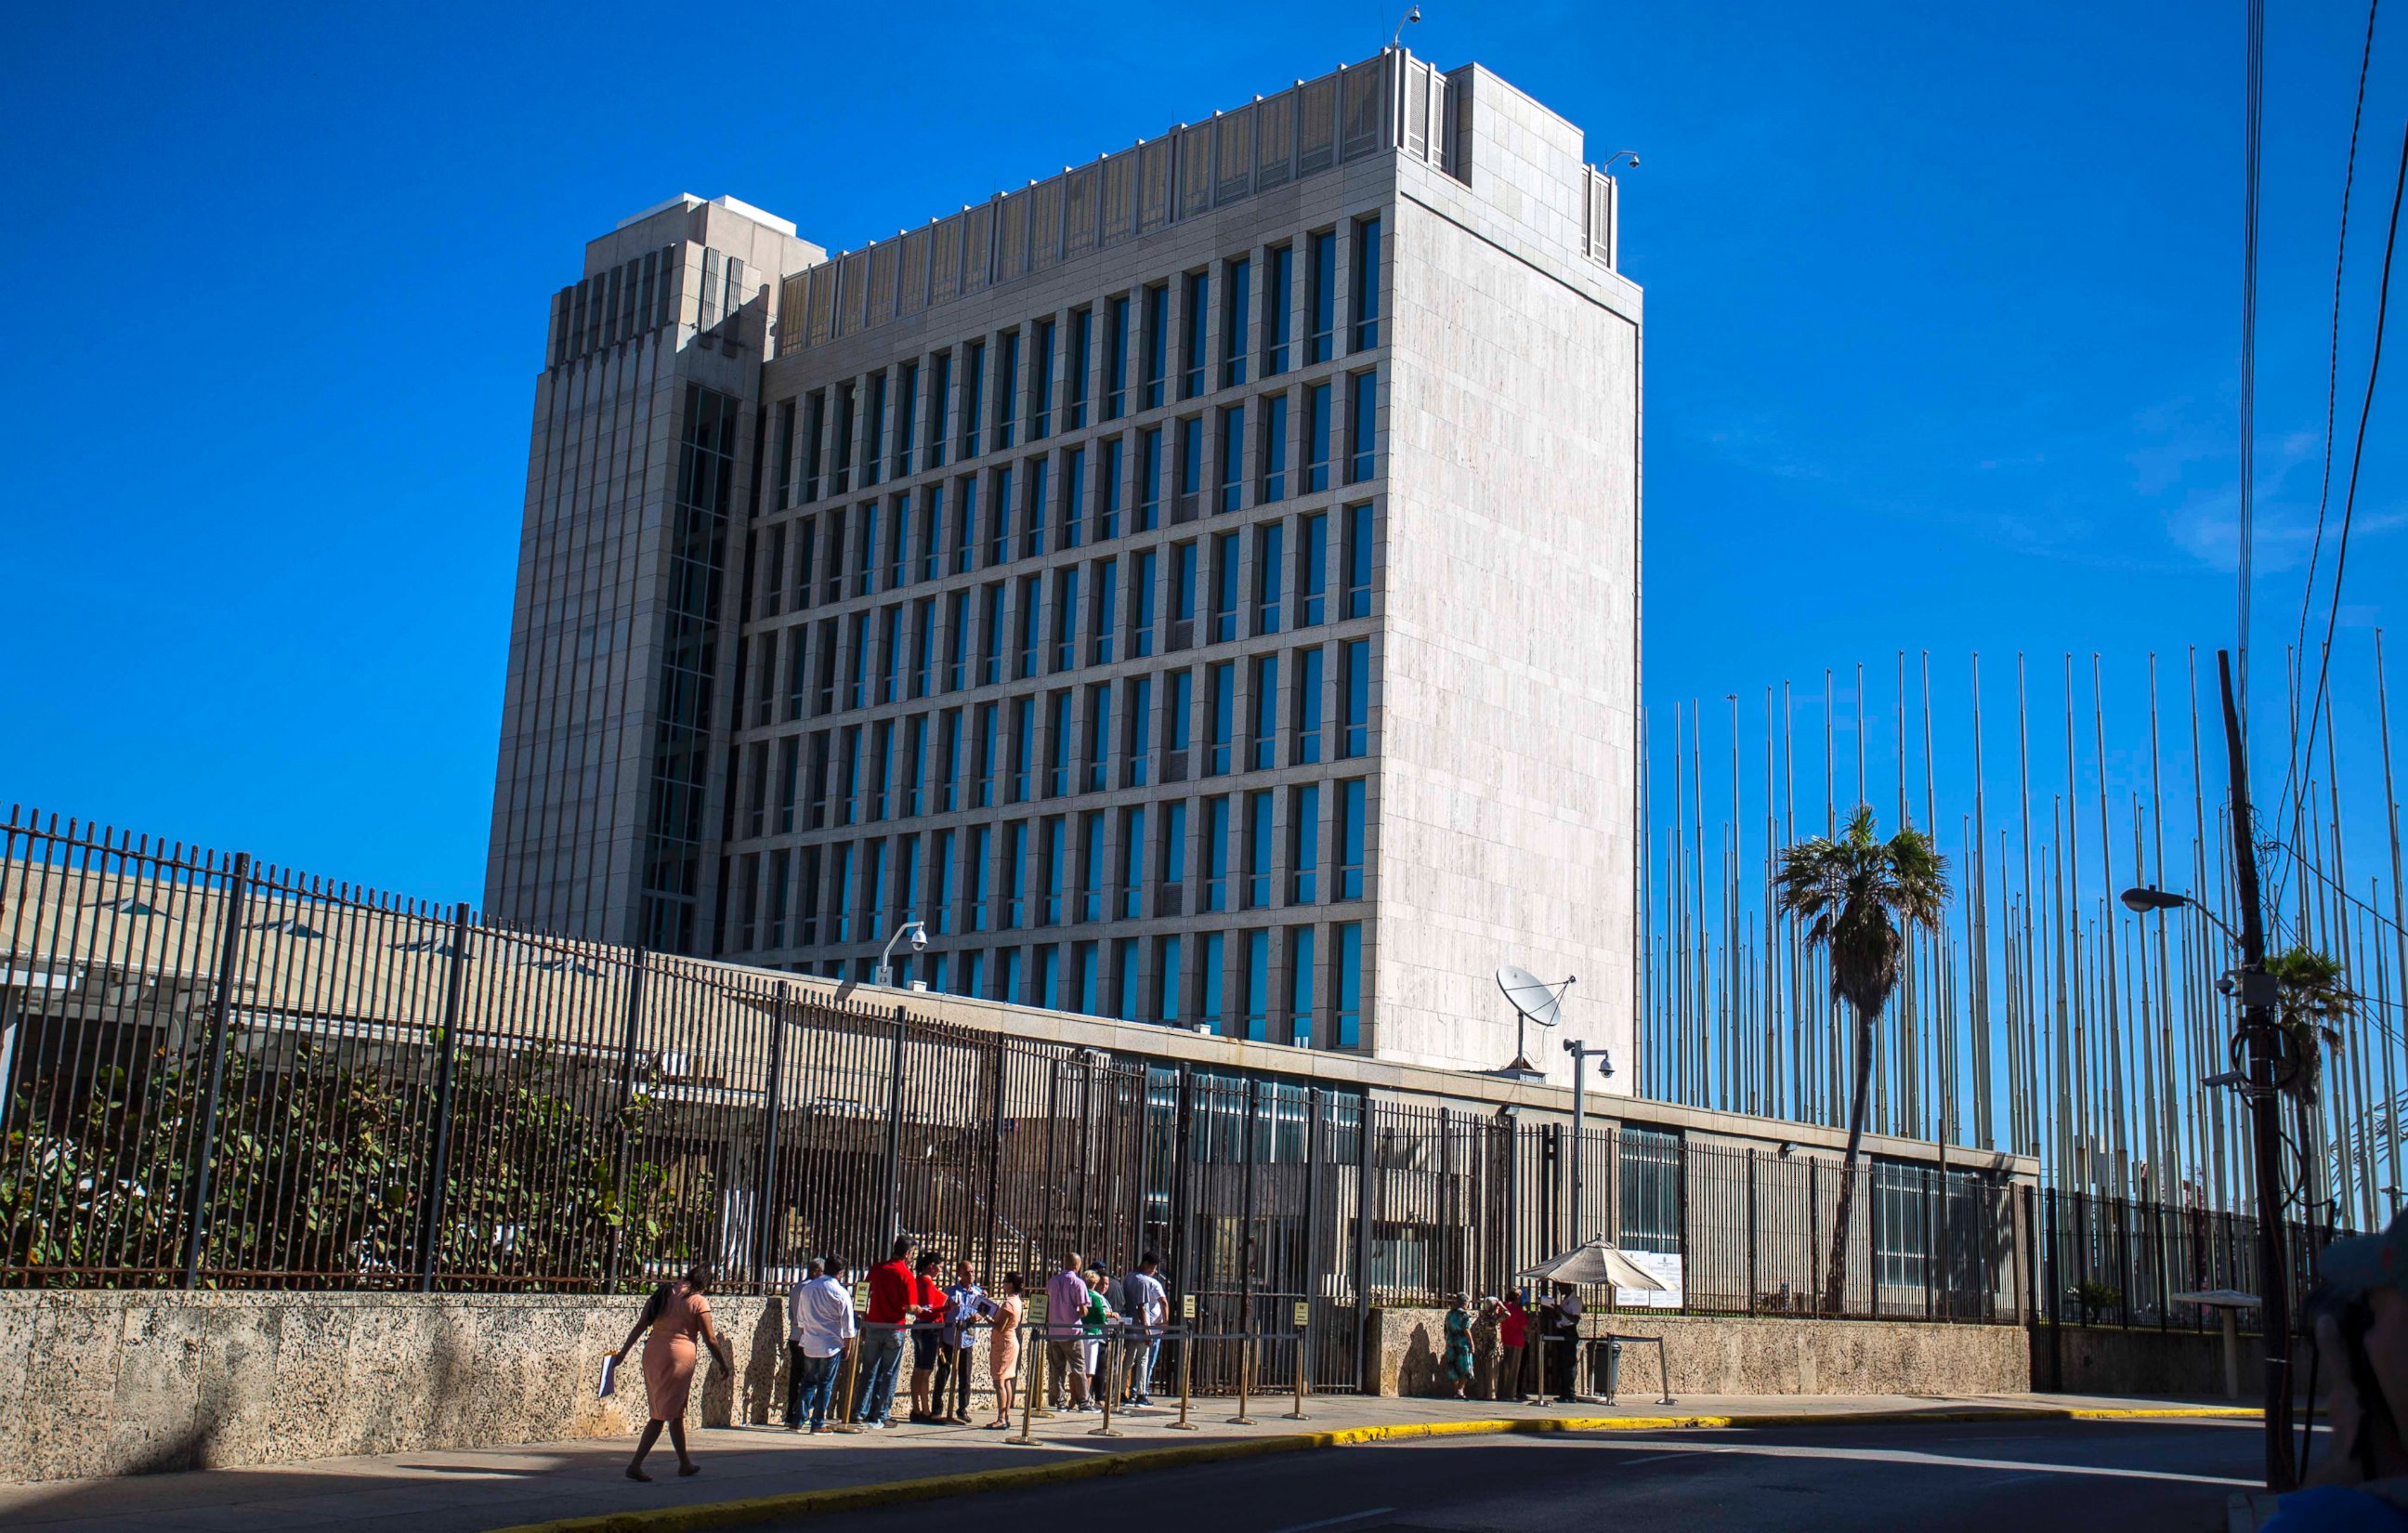 PHOTO: People line up outside the United States embassy in Havana, Cuba, the day after Republican presidential candidate Donald Trump defeated Democrat Hillary Clinton in the U.S. general election, Nov. 9, 2016. 